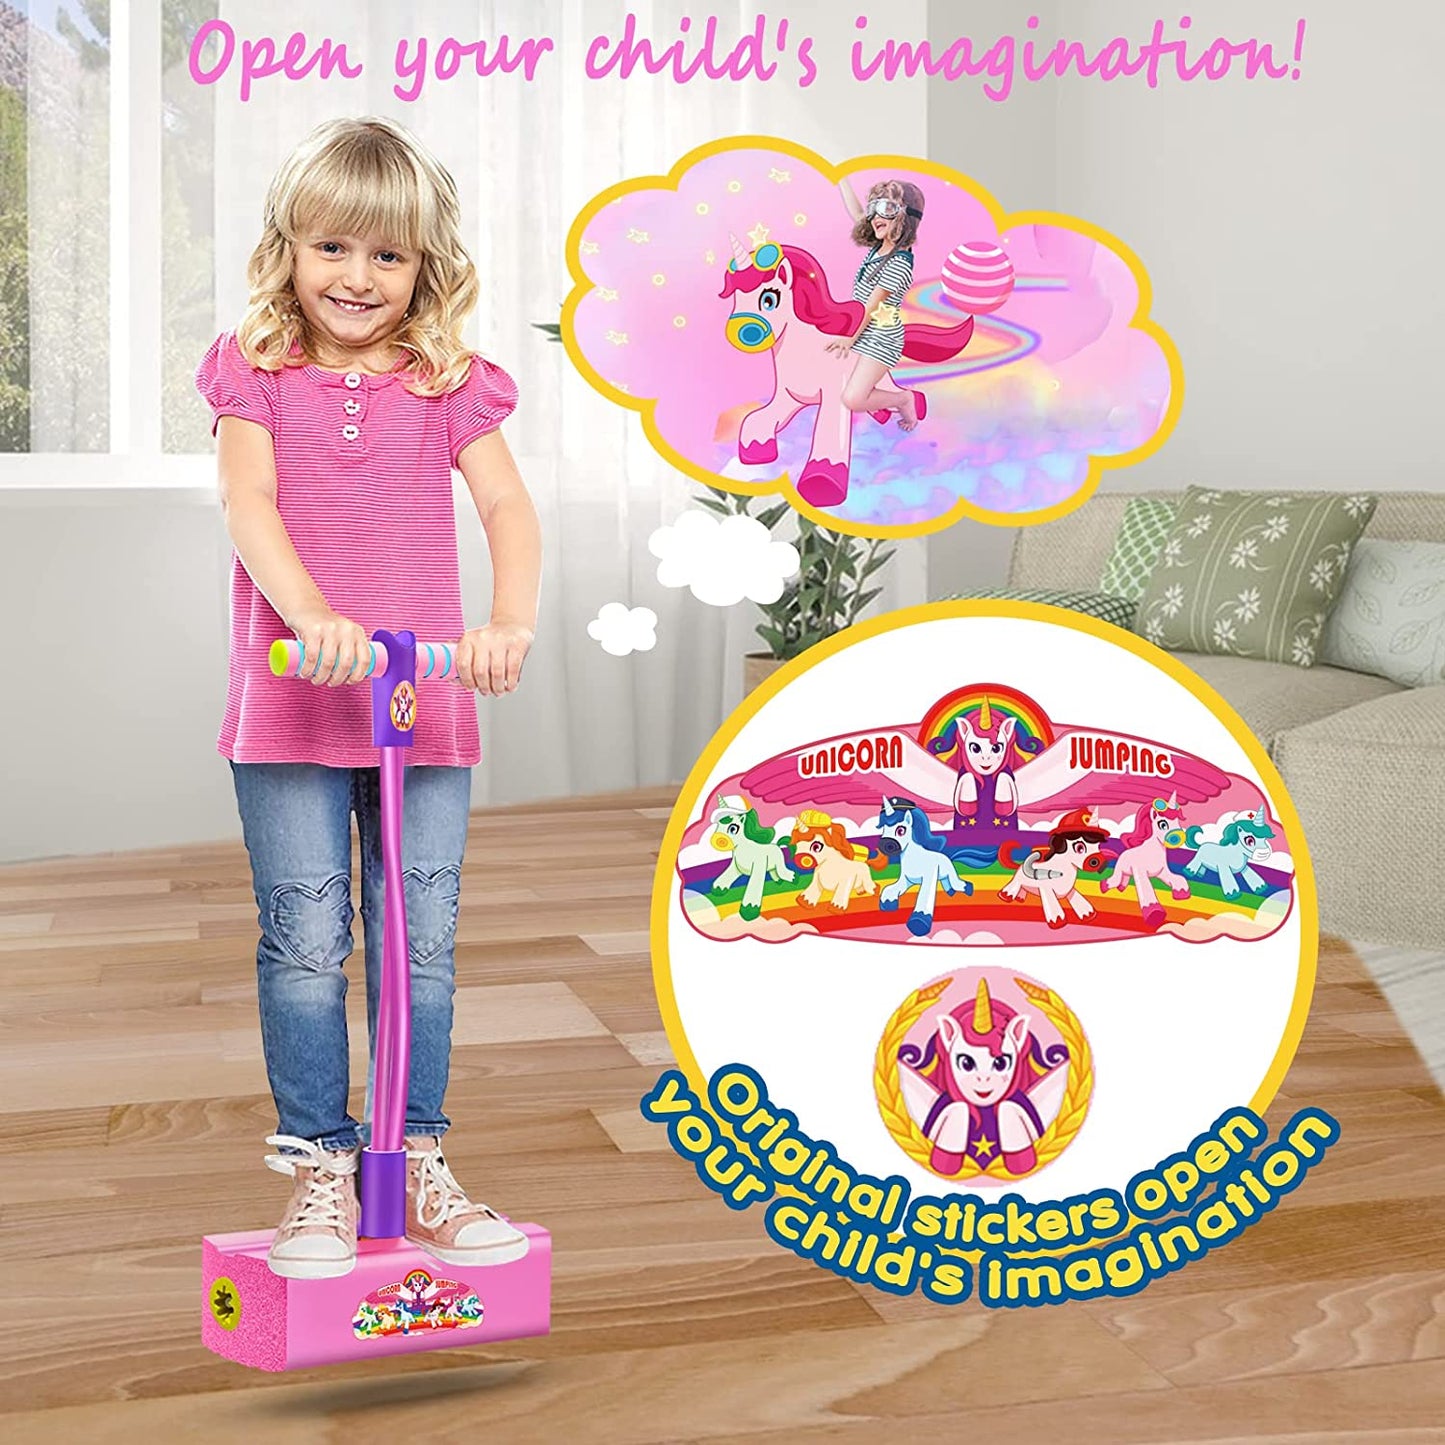 Ynanimery Foam Pogo Stick for Kids Toddlers, Durable and Fun Jumper with Unicorn or Dinosaur Stickers for Girls Ages 3 and up, Indoor | Outdoor | Garden Games | Party Favors Jumping Gift,Pink